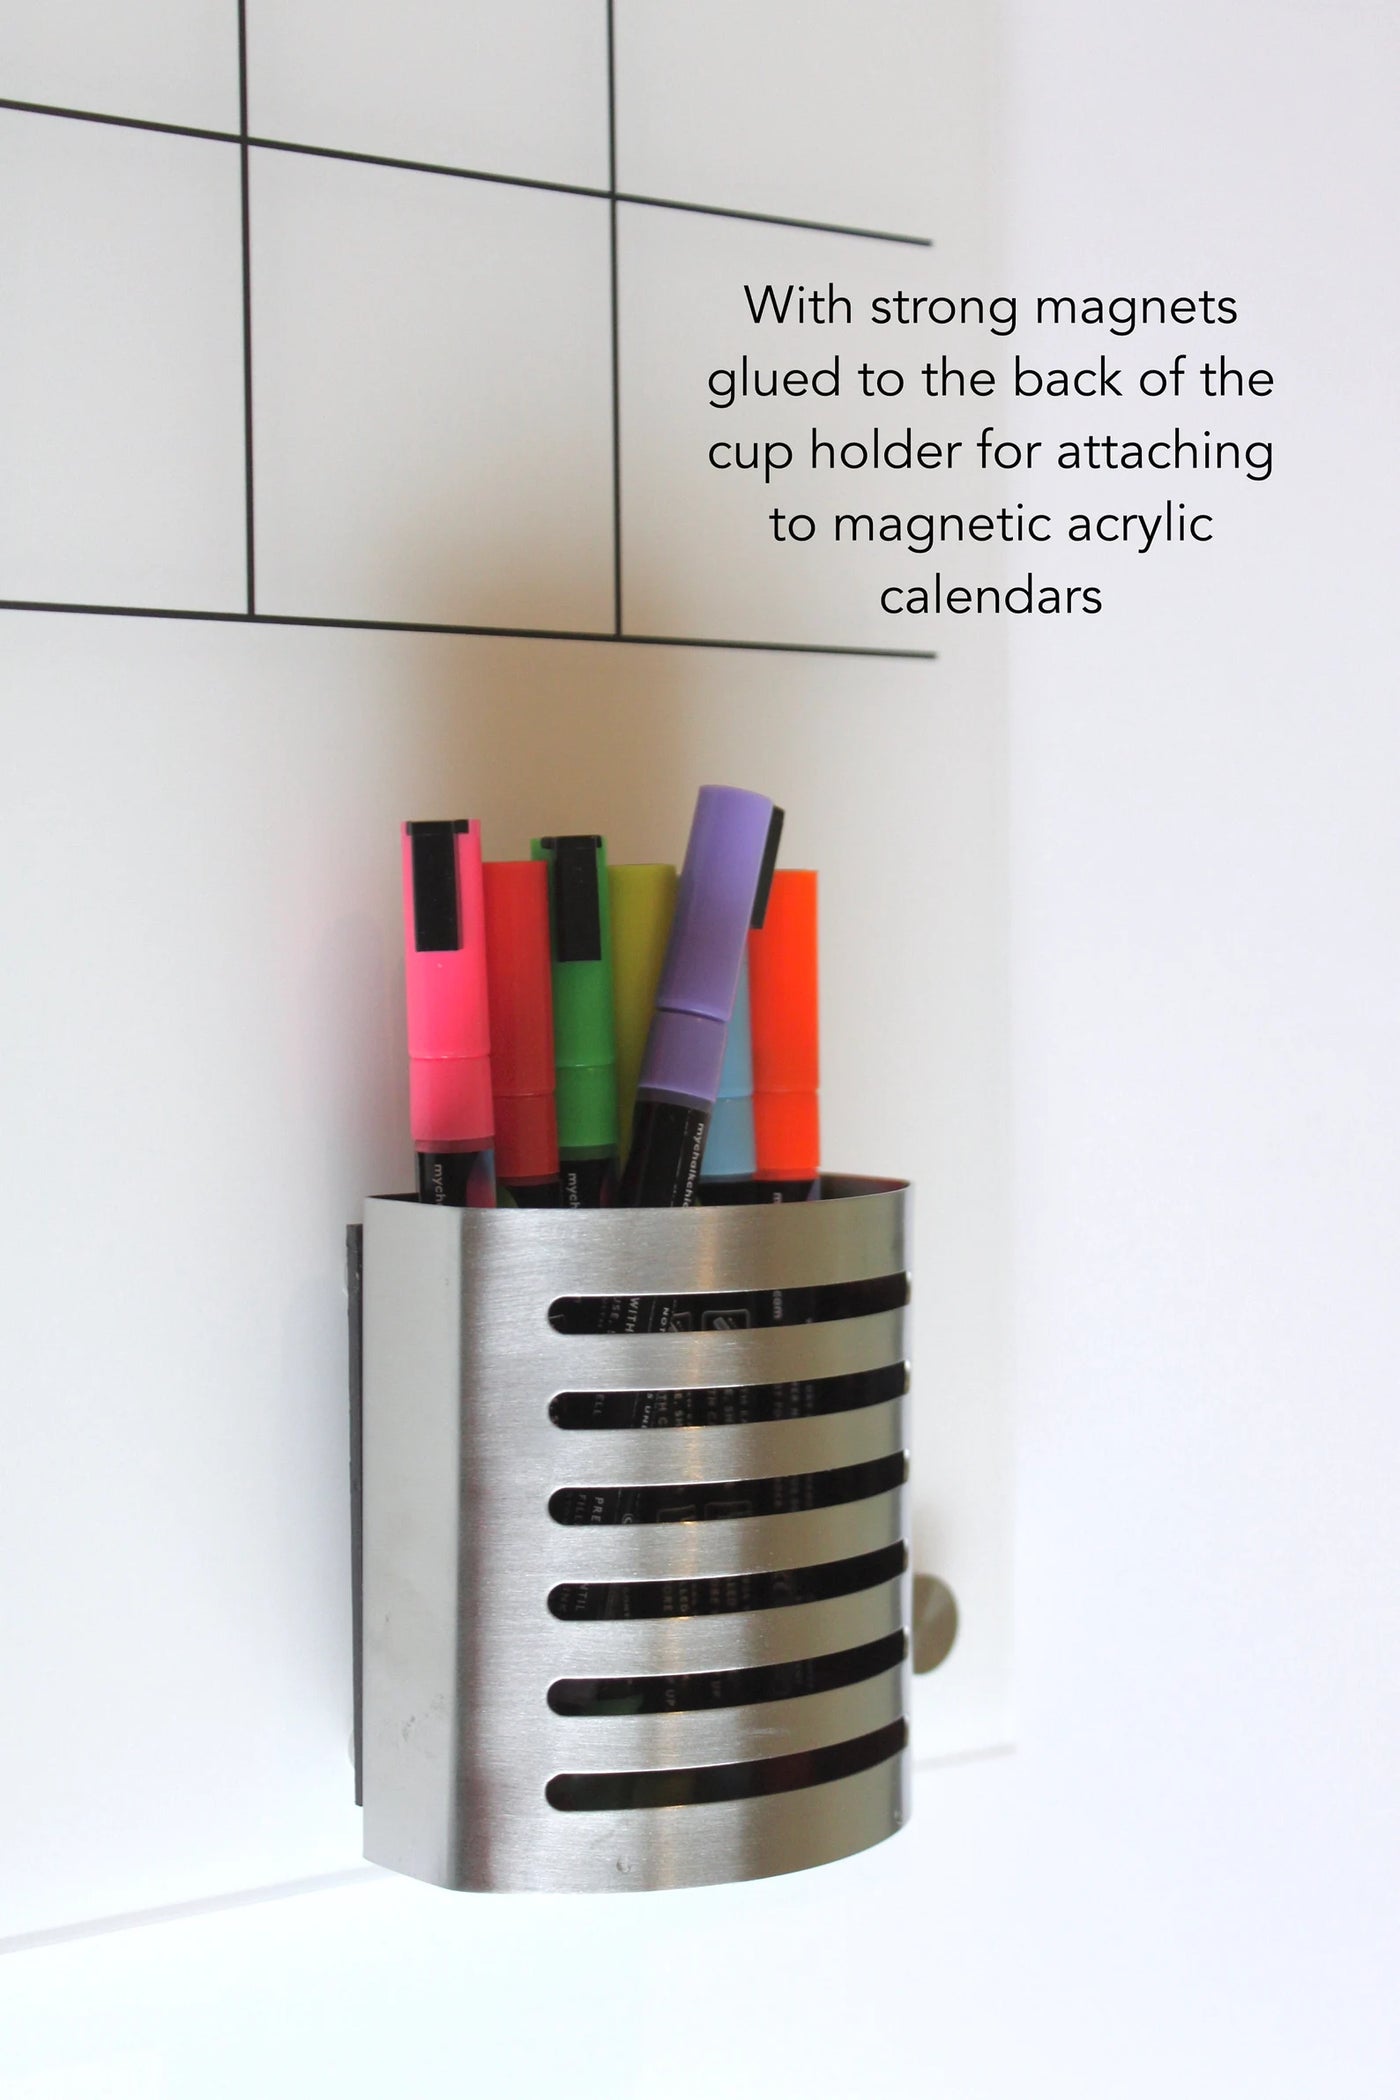 Magnetic Stainless Steel Marker holder with strong magnets